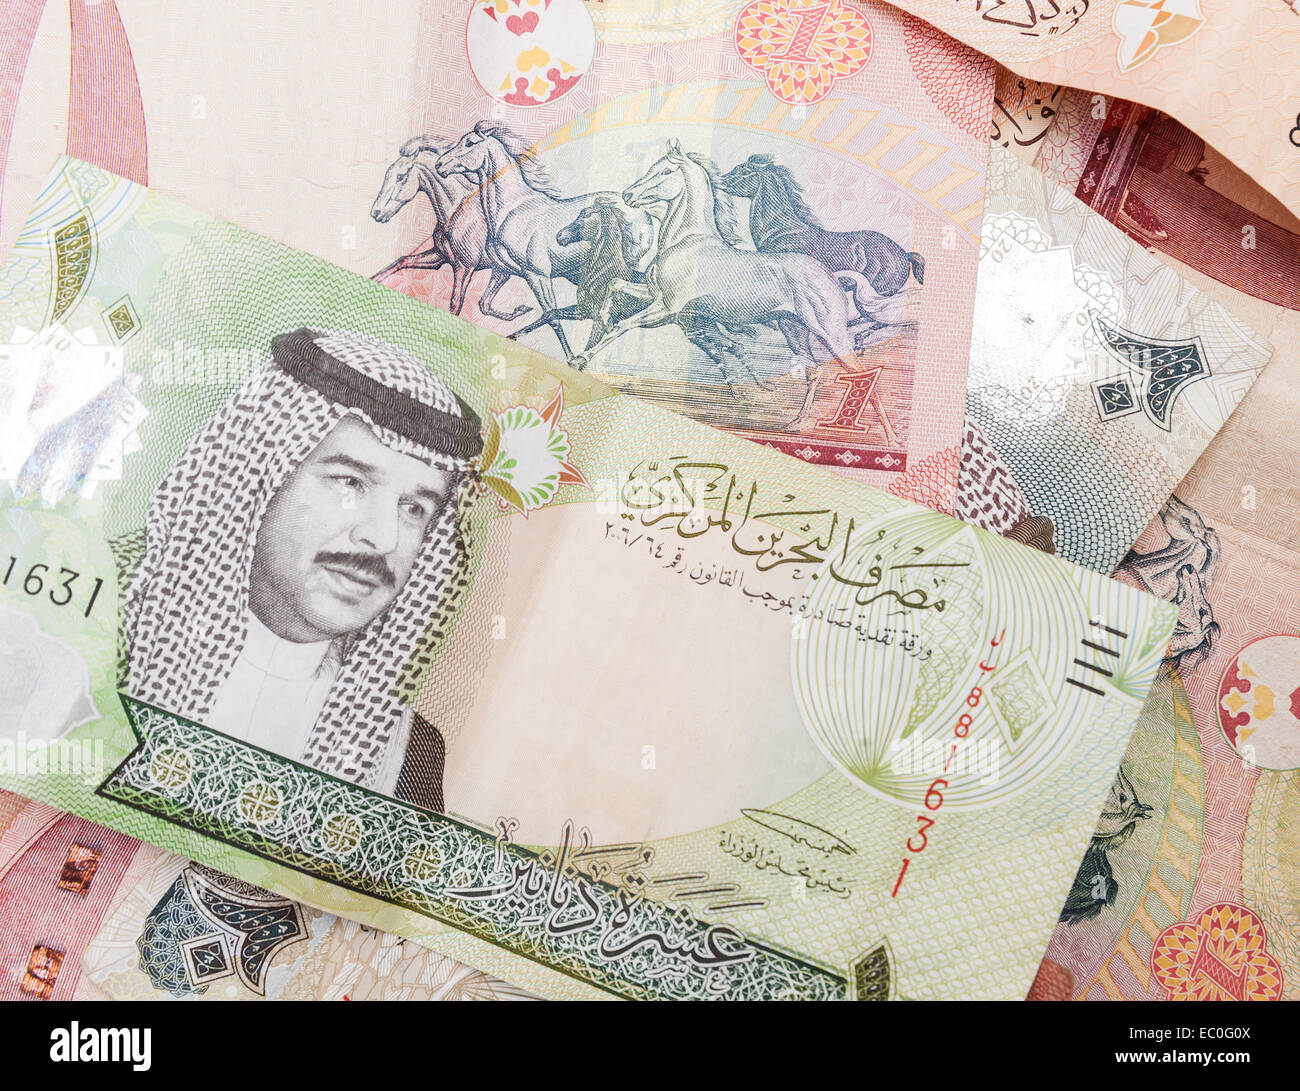 Page 2 - Dinars High Resolution Stock Photography and Images - Alamy